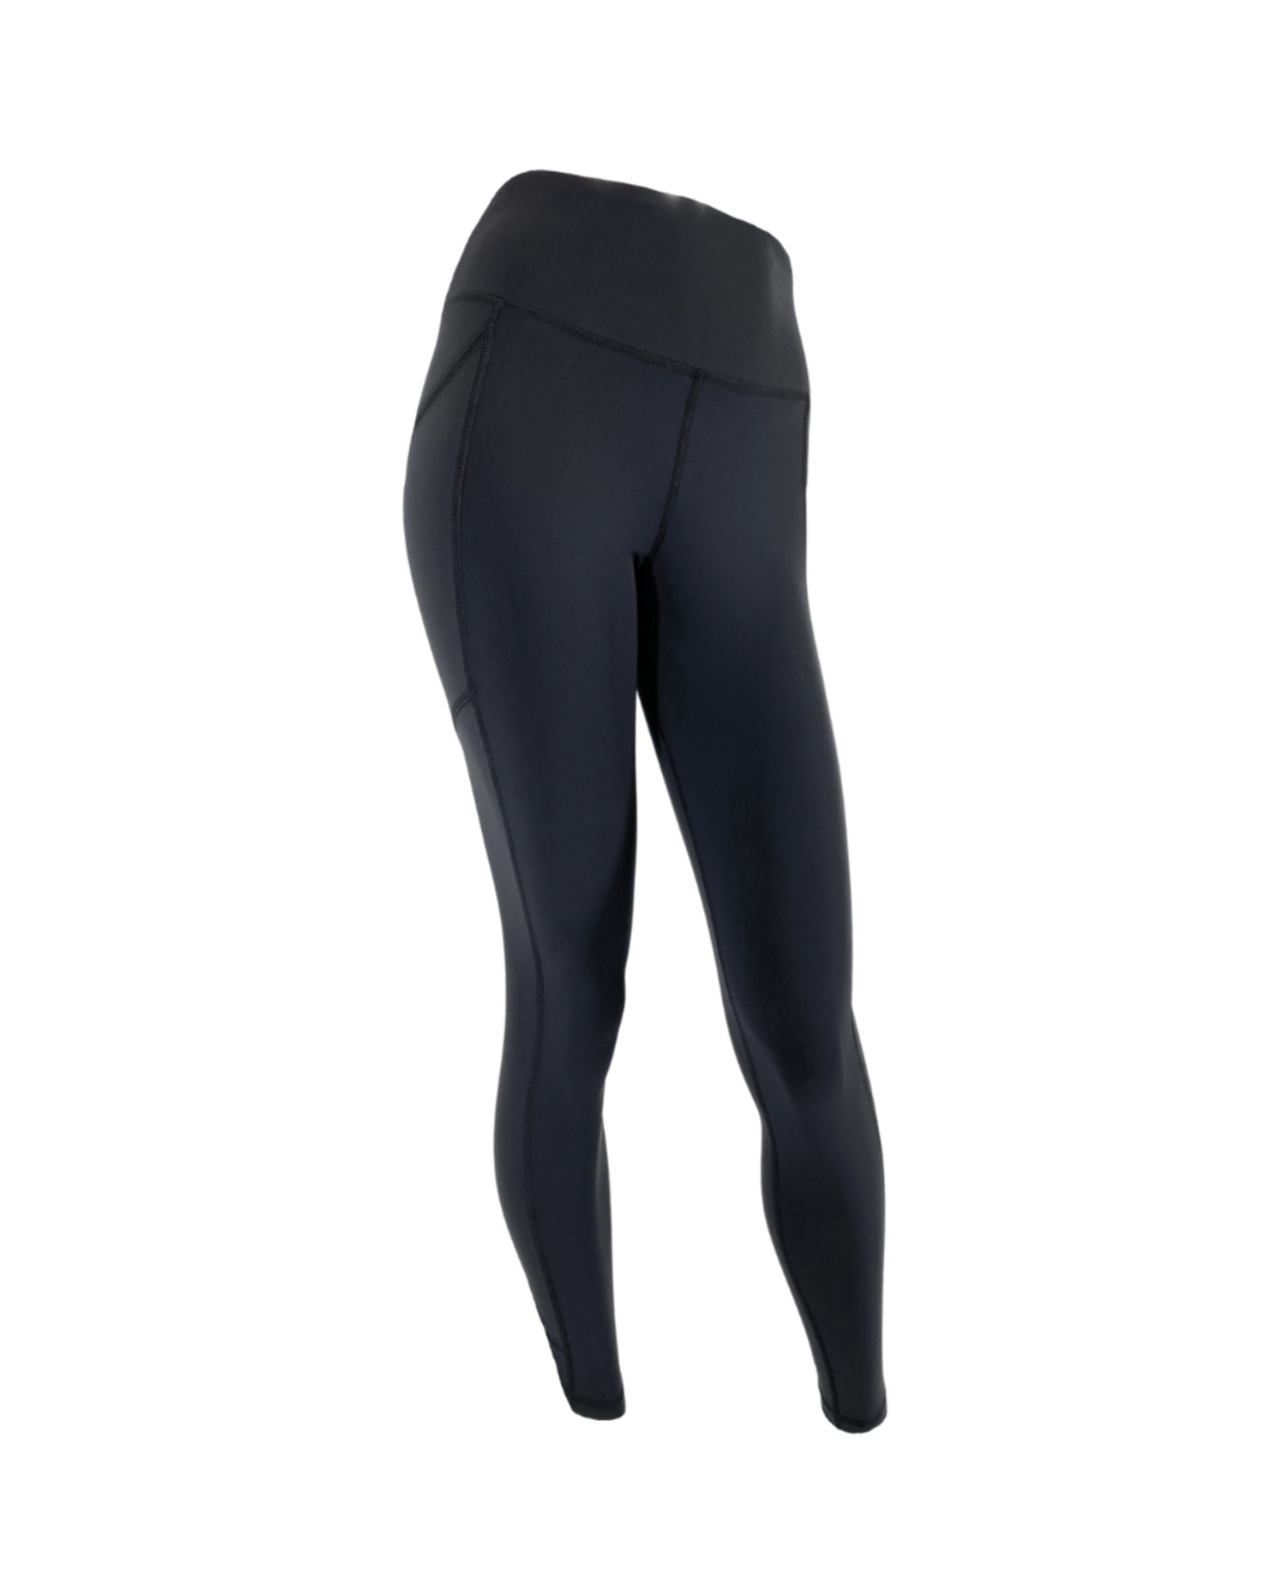 Clearance Women's Pants & Tights.